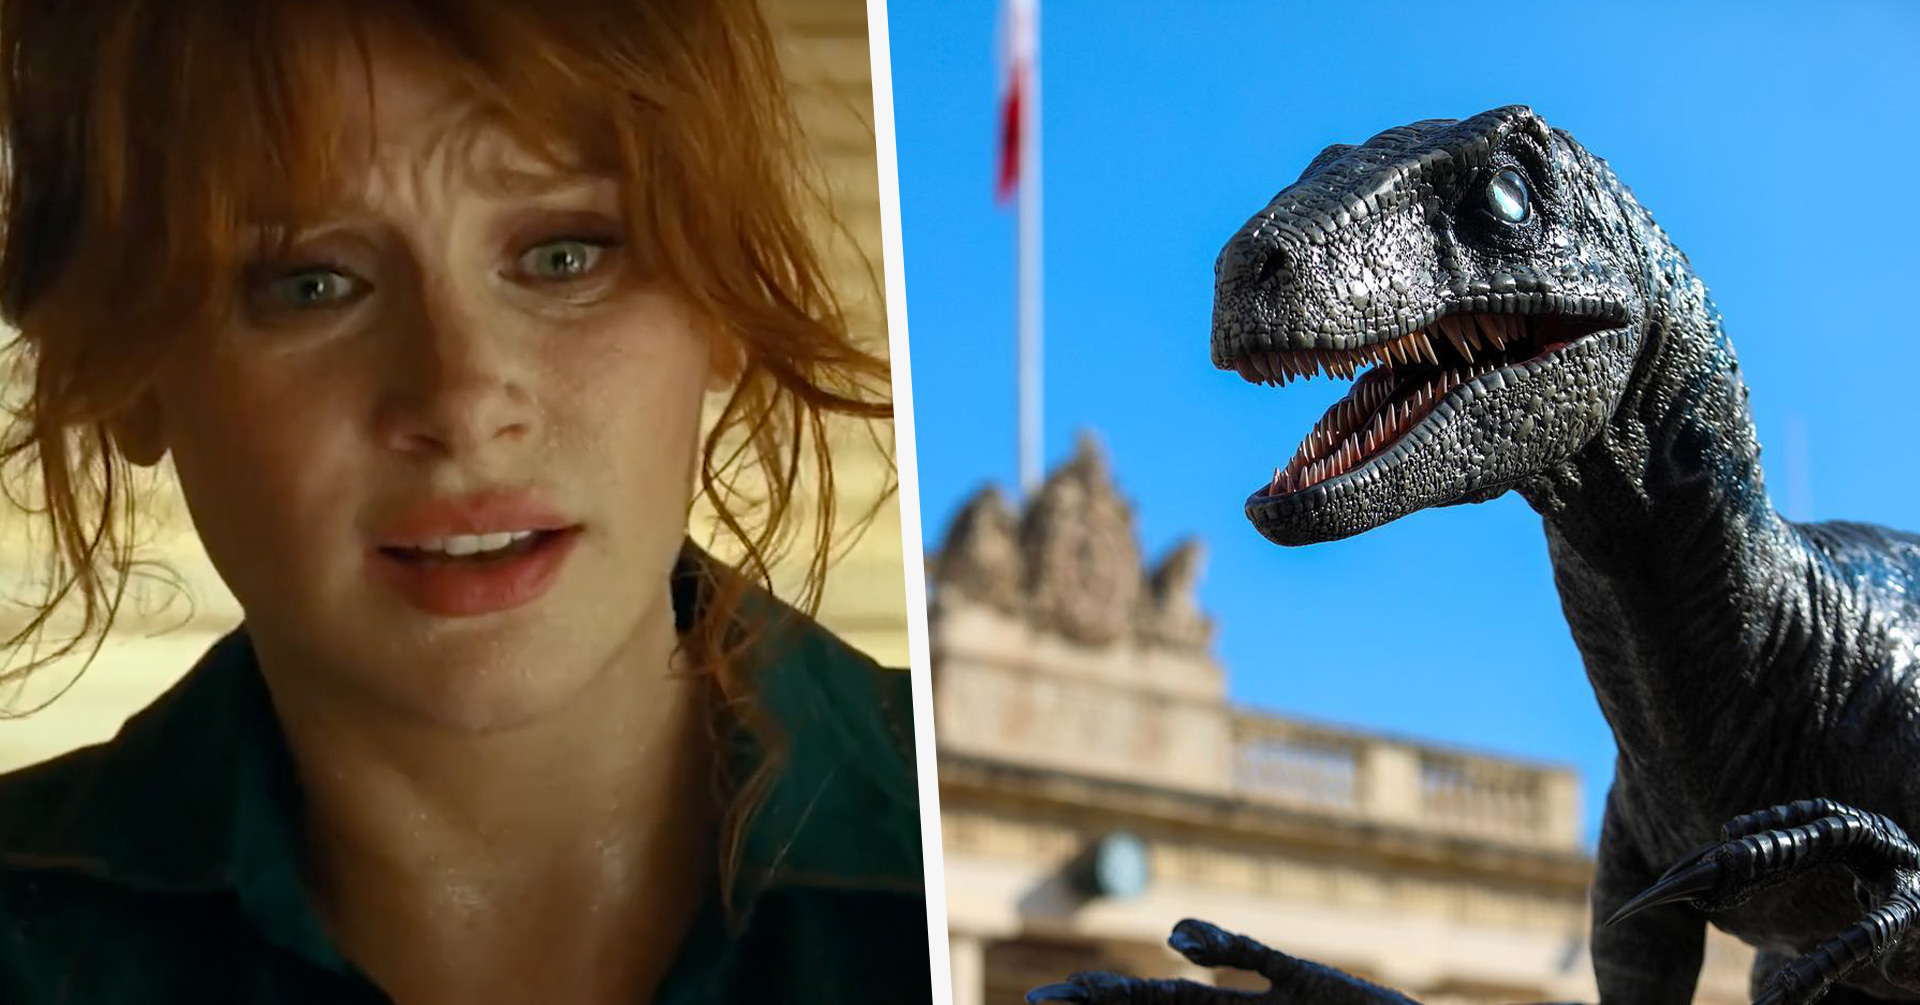 Jurassic World Cast Are Back In Malta To Hand Out Copies Of The Film 